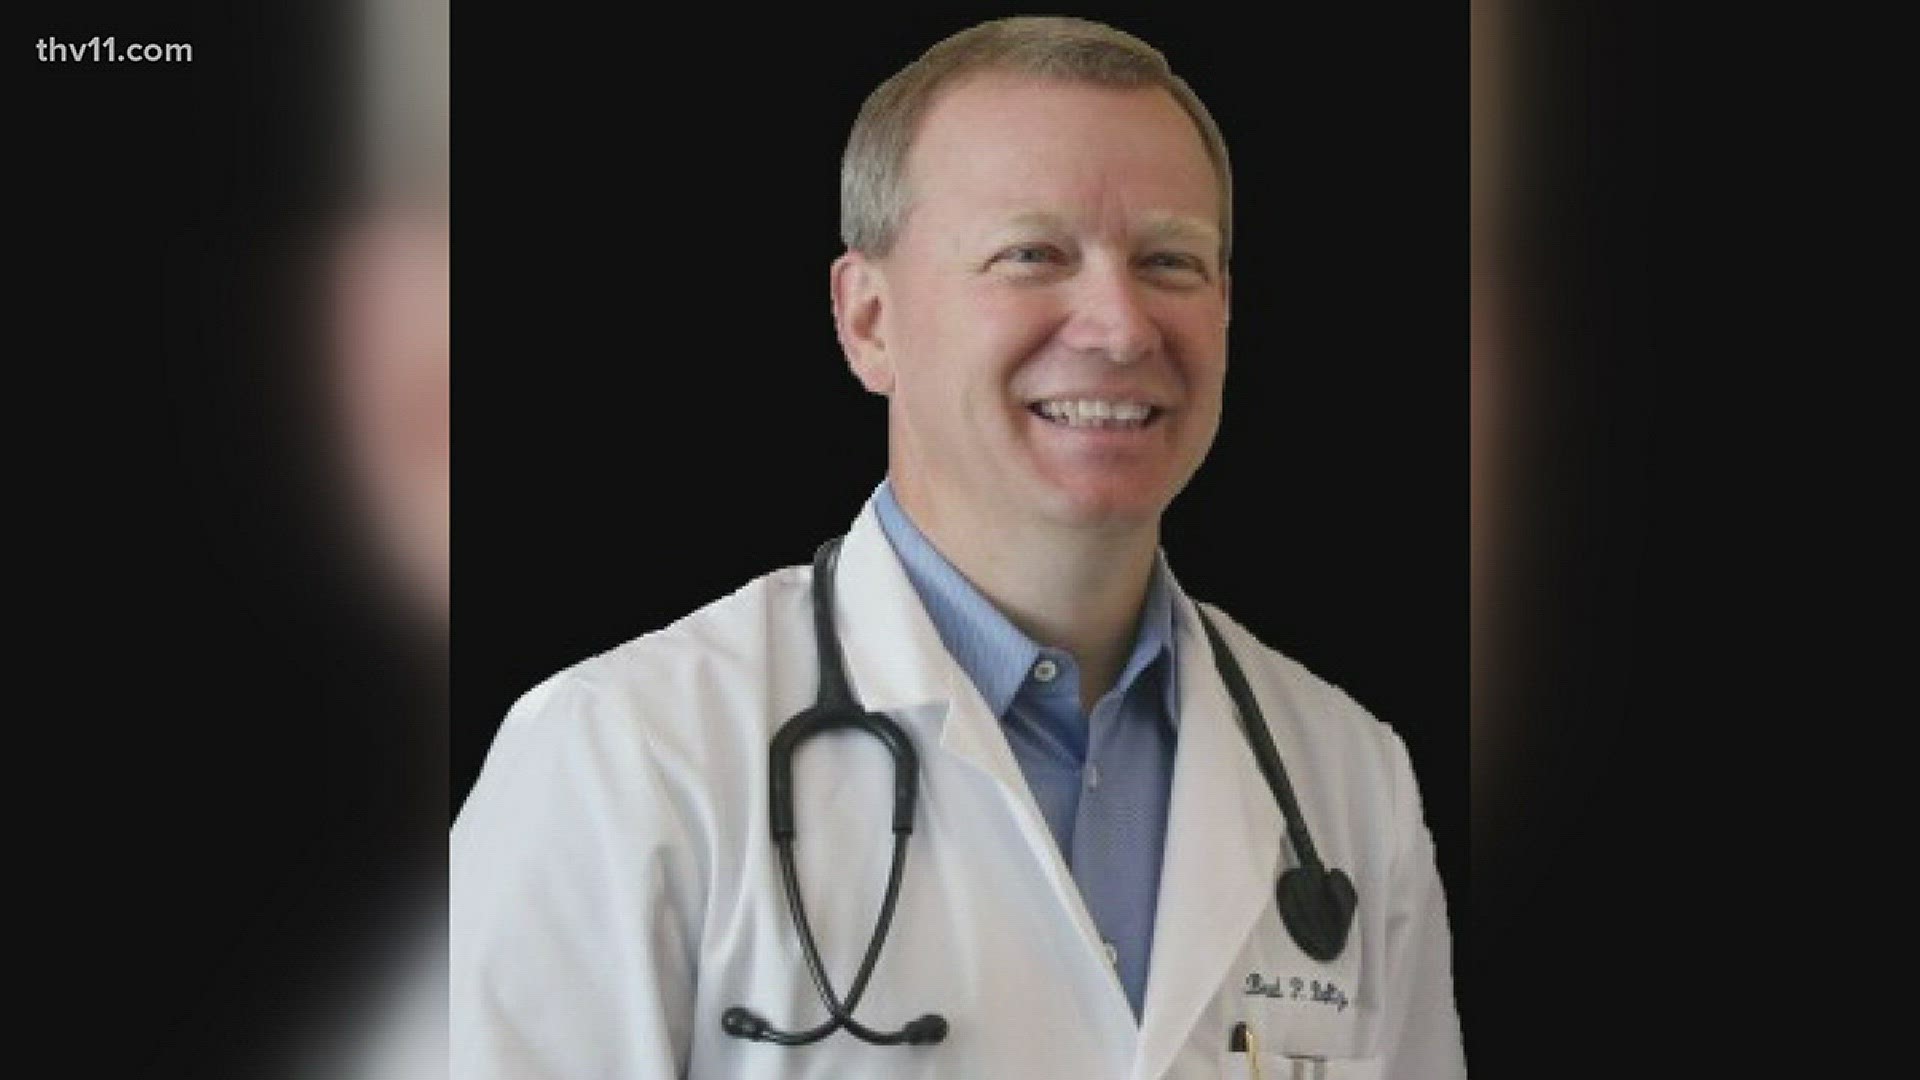 CARTI has fired Dr. Brad Baltz, the state's highest-paid oncologist. That and more from Arkansas Business in this segment.